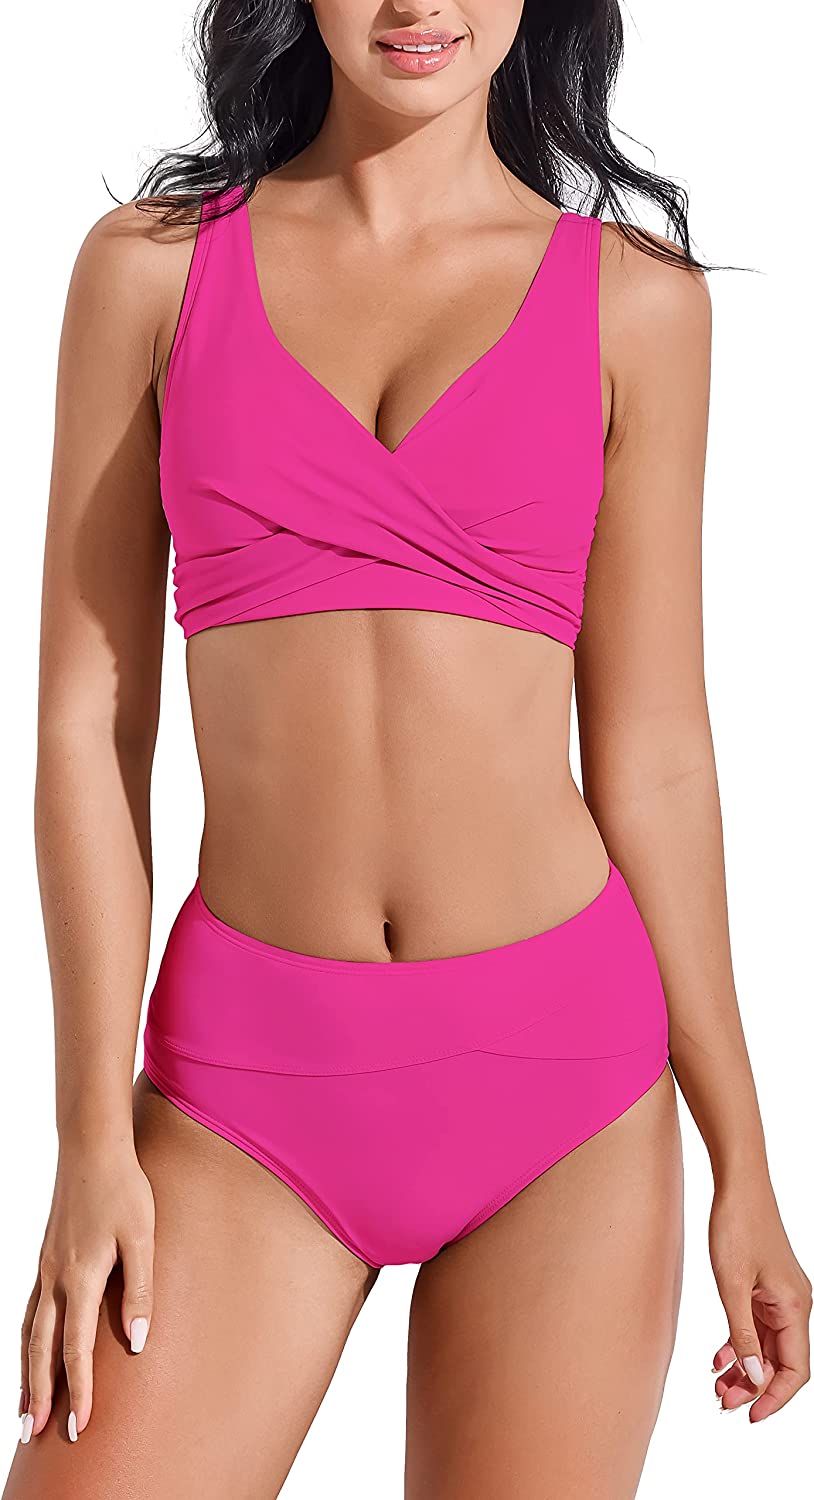 Beautikini Women's Two Piece Bikini Set, High Waisted Twist Front Bathing Suit with Briefs V Neck Tie Back Ruched Swimsuit